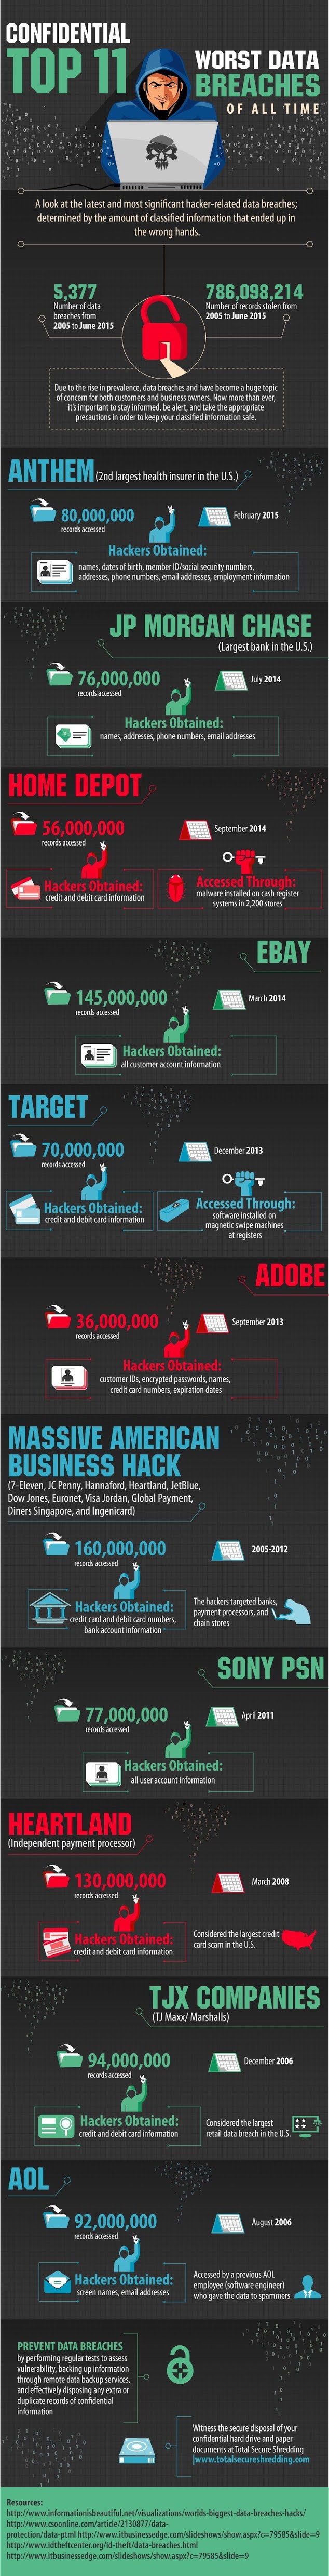 Top 11 Worst Data Breaches of All Time #infographic #Cyber security #Hackers #Data Breaches #Worst Data Breaches